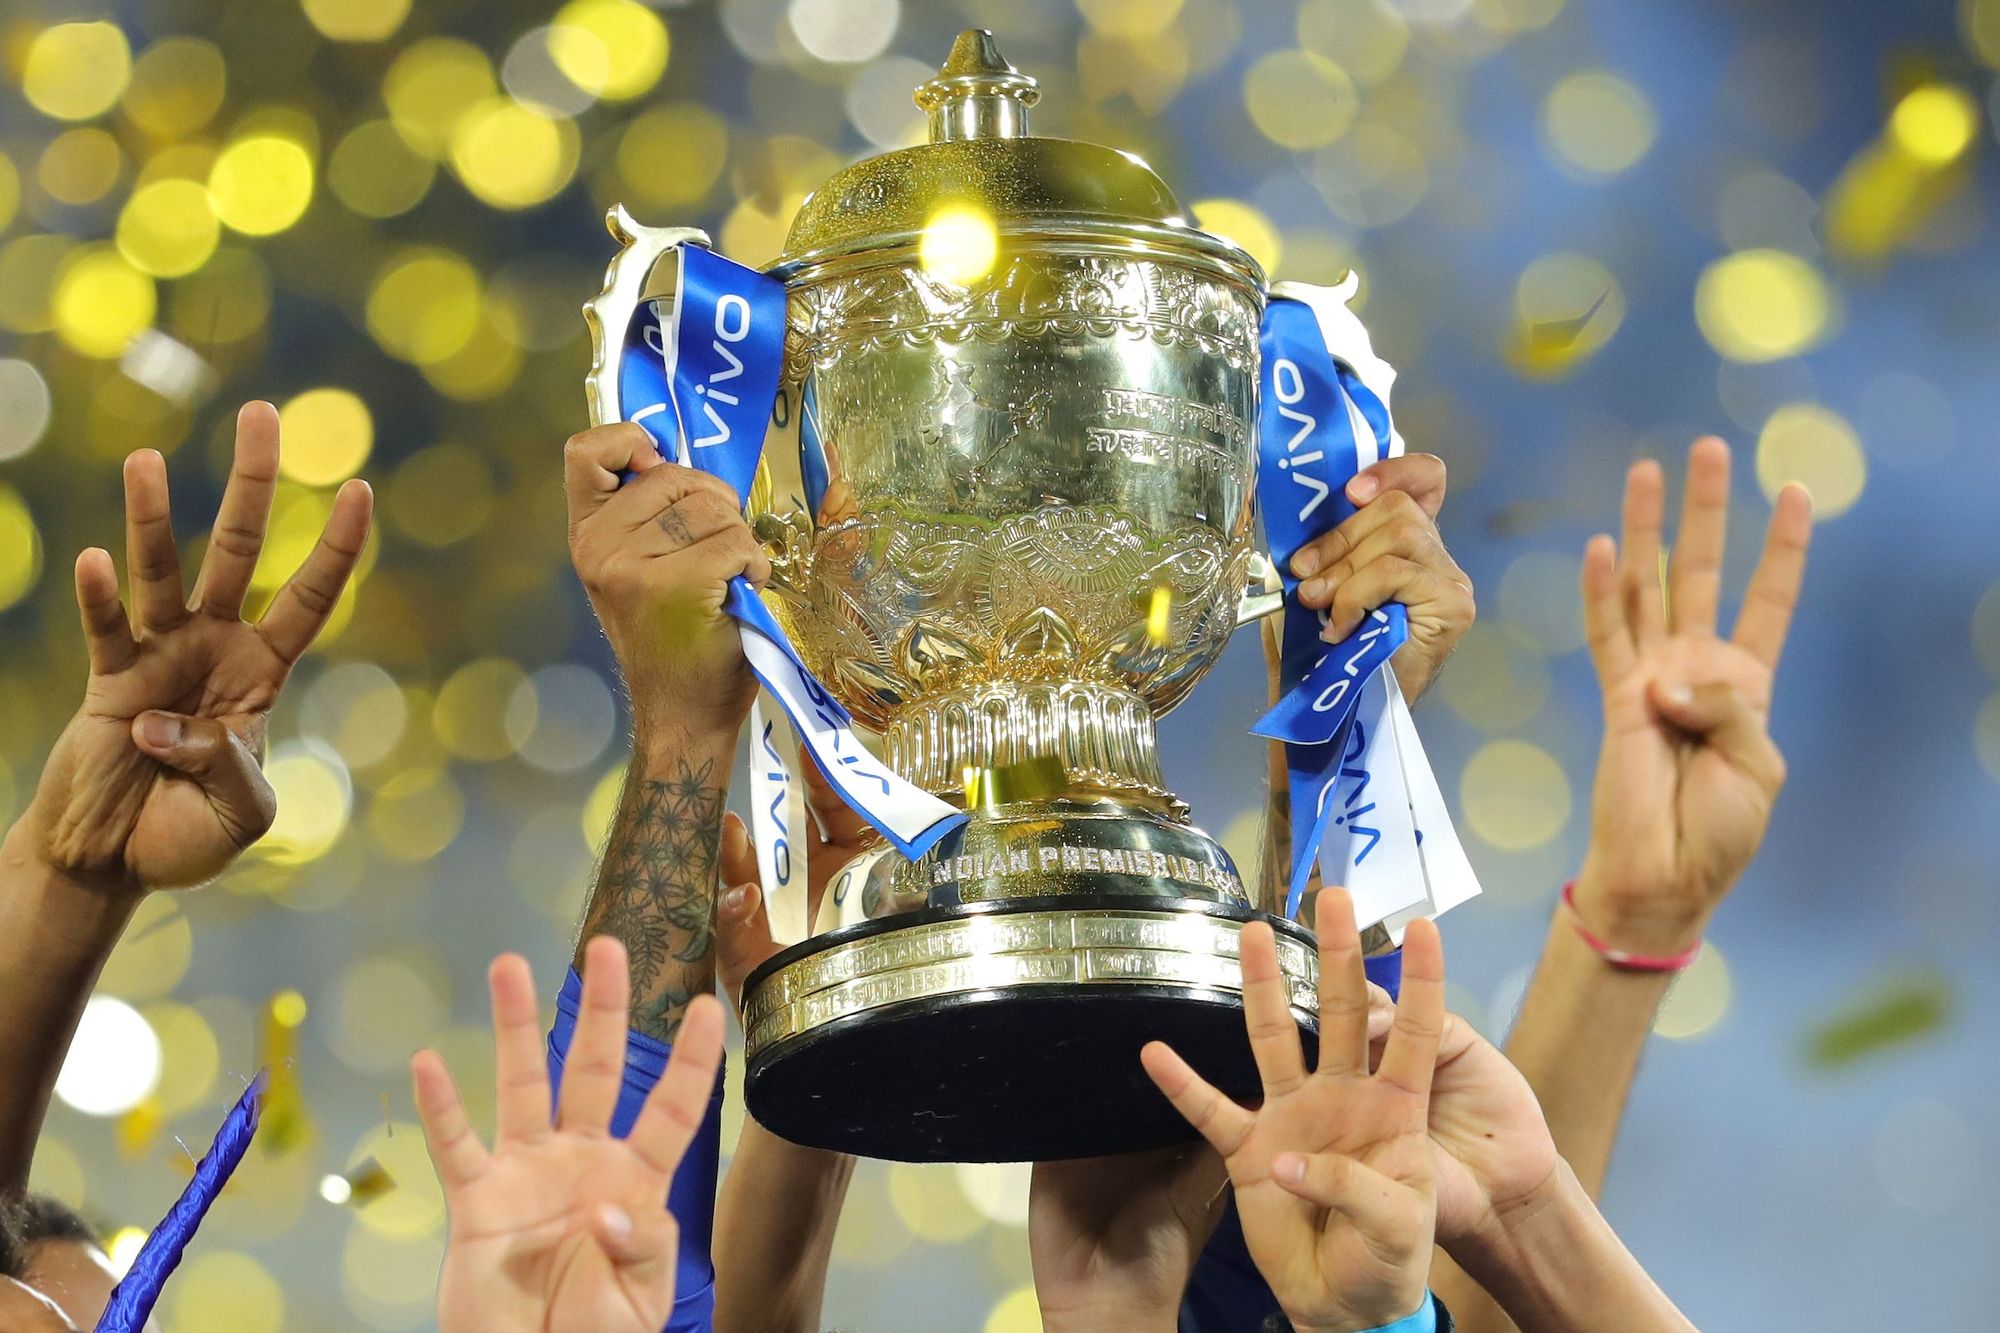 The IPL is one of the most lucrative sports brand in the world